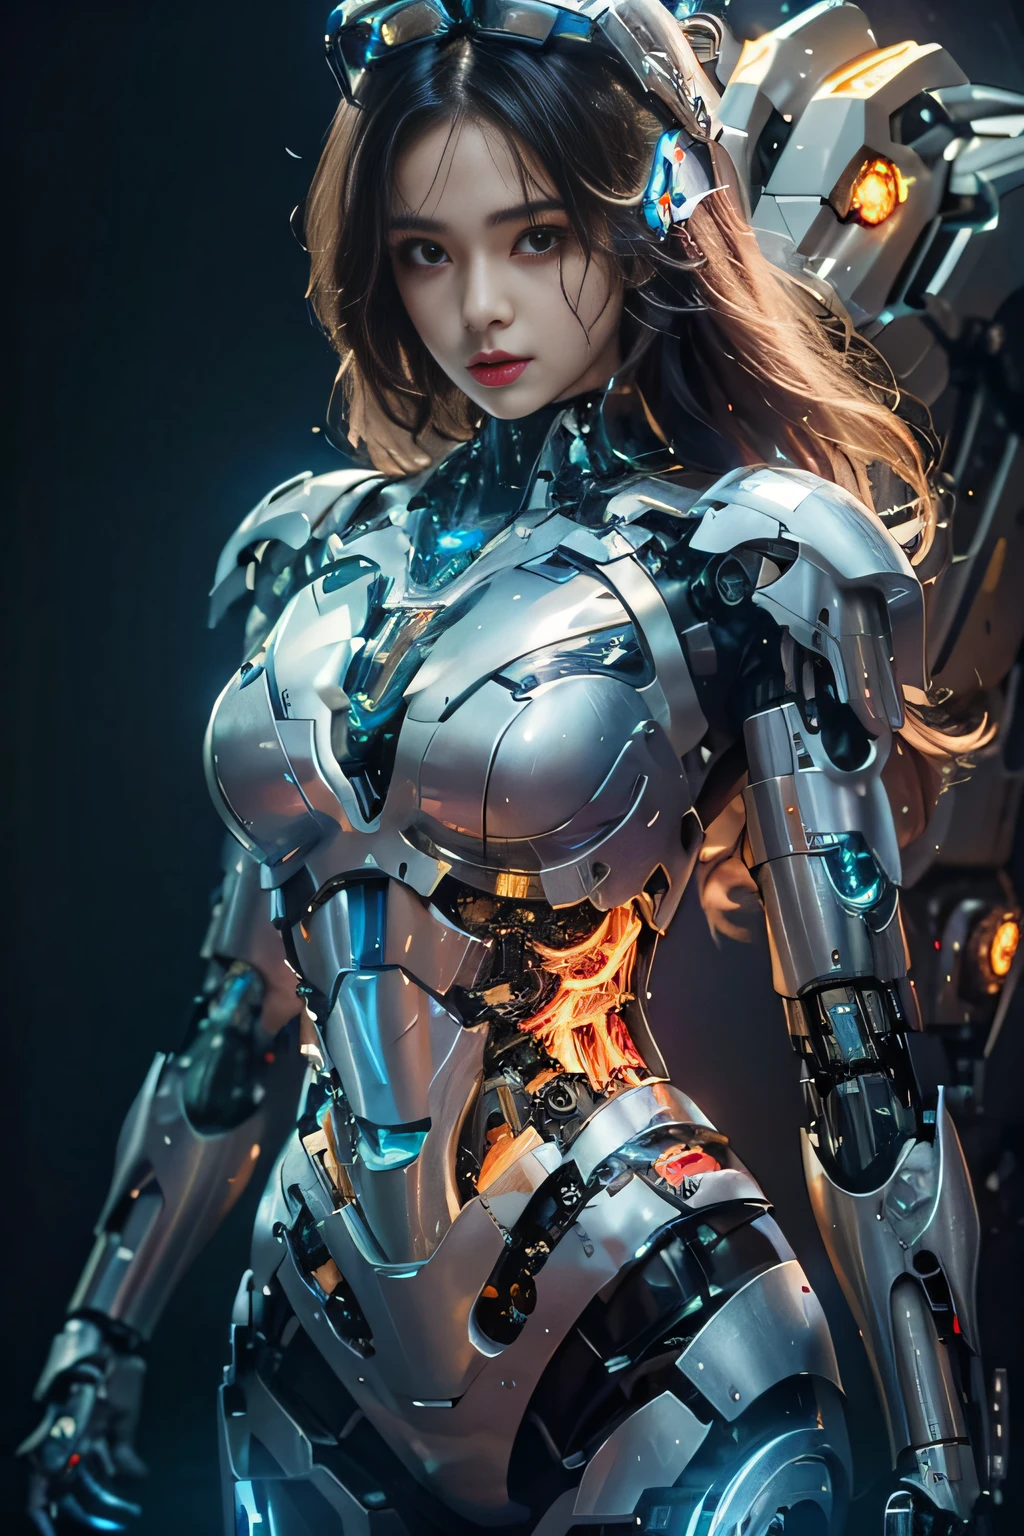 a woman in a futuristic suit with a sword and armor, beutiful girl cyborg, beutiful white girl cyborg, cyborg girl, cyborg - girl, girl in mecha cyber armor, cute cyborg girl, perfect anime cyborg woman, perfect android girl, female cyborg, perfect cyborg female, beautiful cyborg girl, female robot, young lady cyborg, female mecha, armor girl